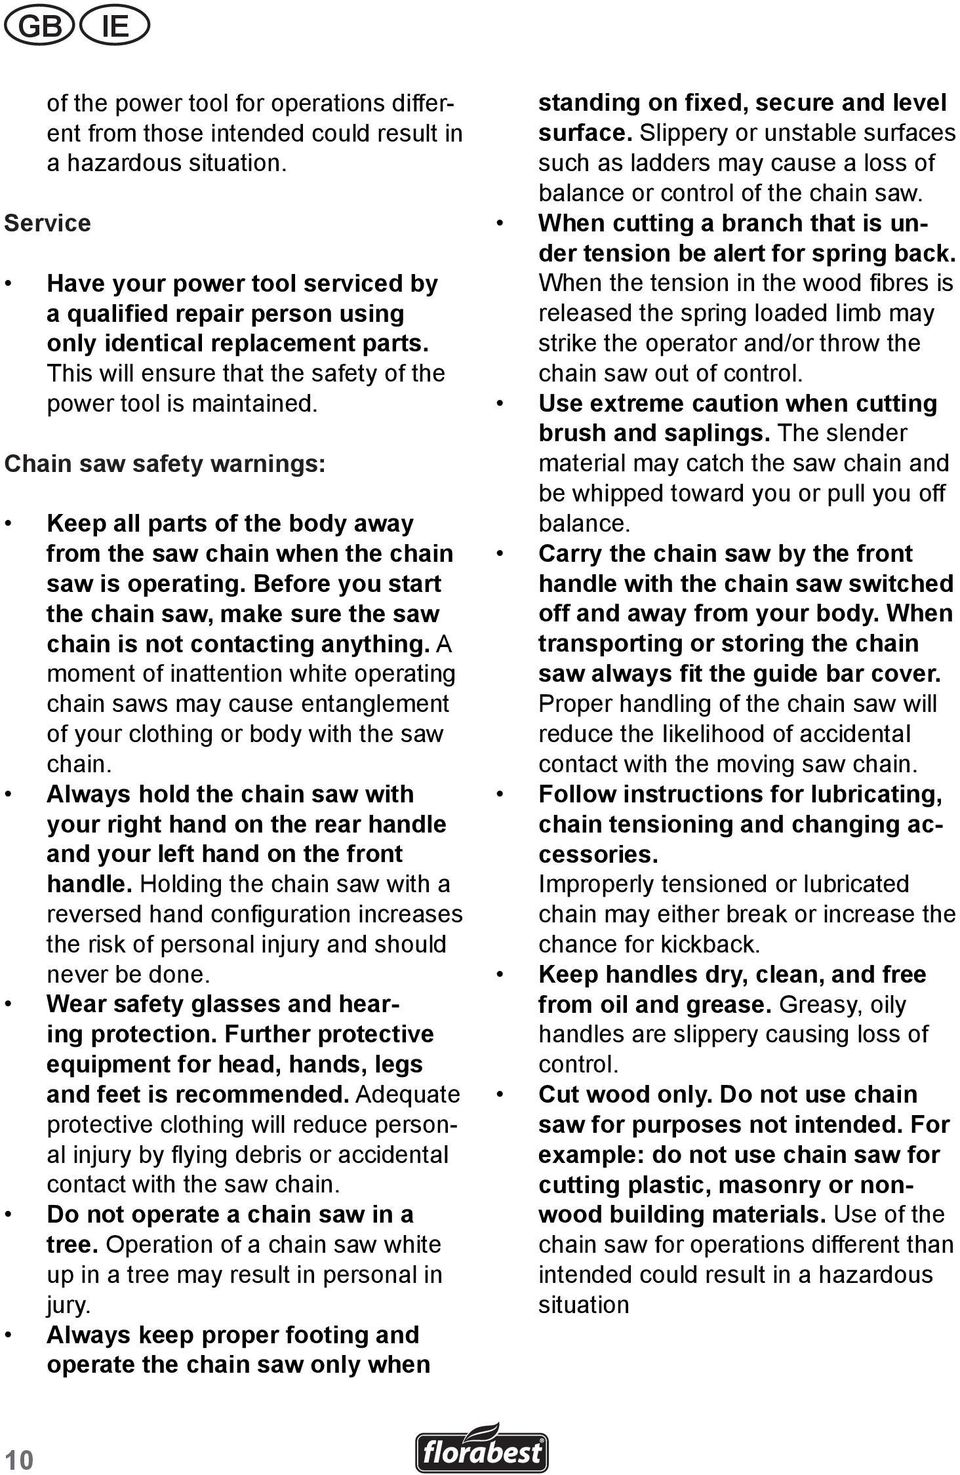 Chain saw safety warnings: Keep all parts of the body away from the saw chain when the chain saw is operating. Before you start the chain saw, make sure the saw chain is not contacting anything.